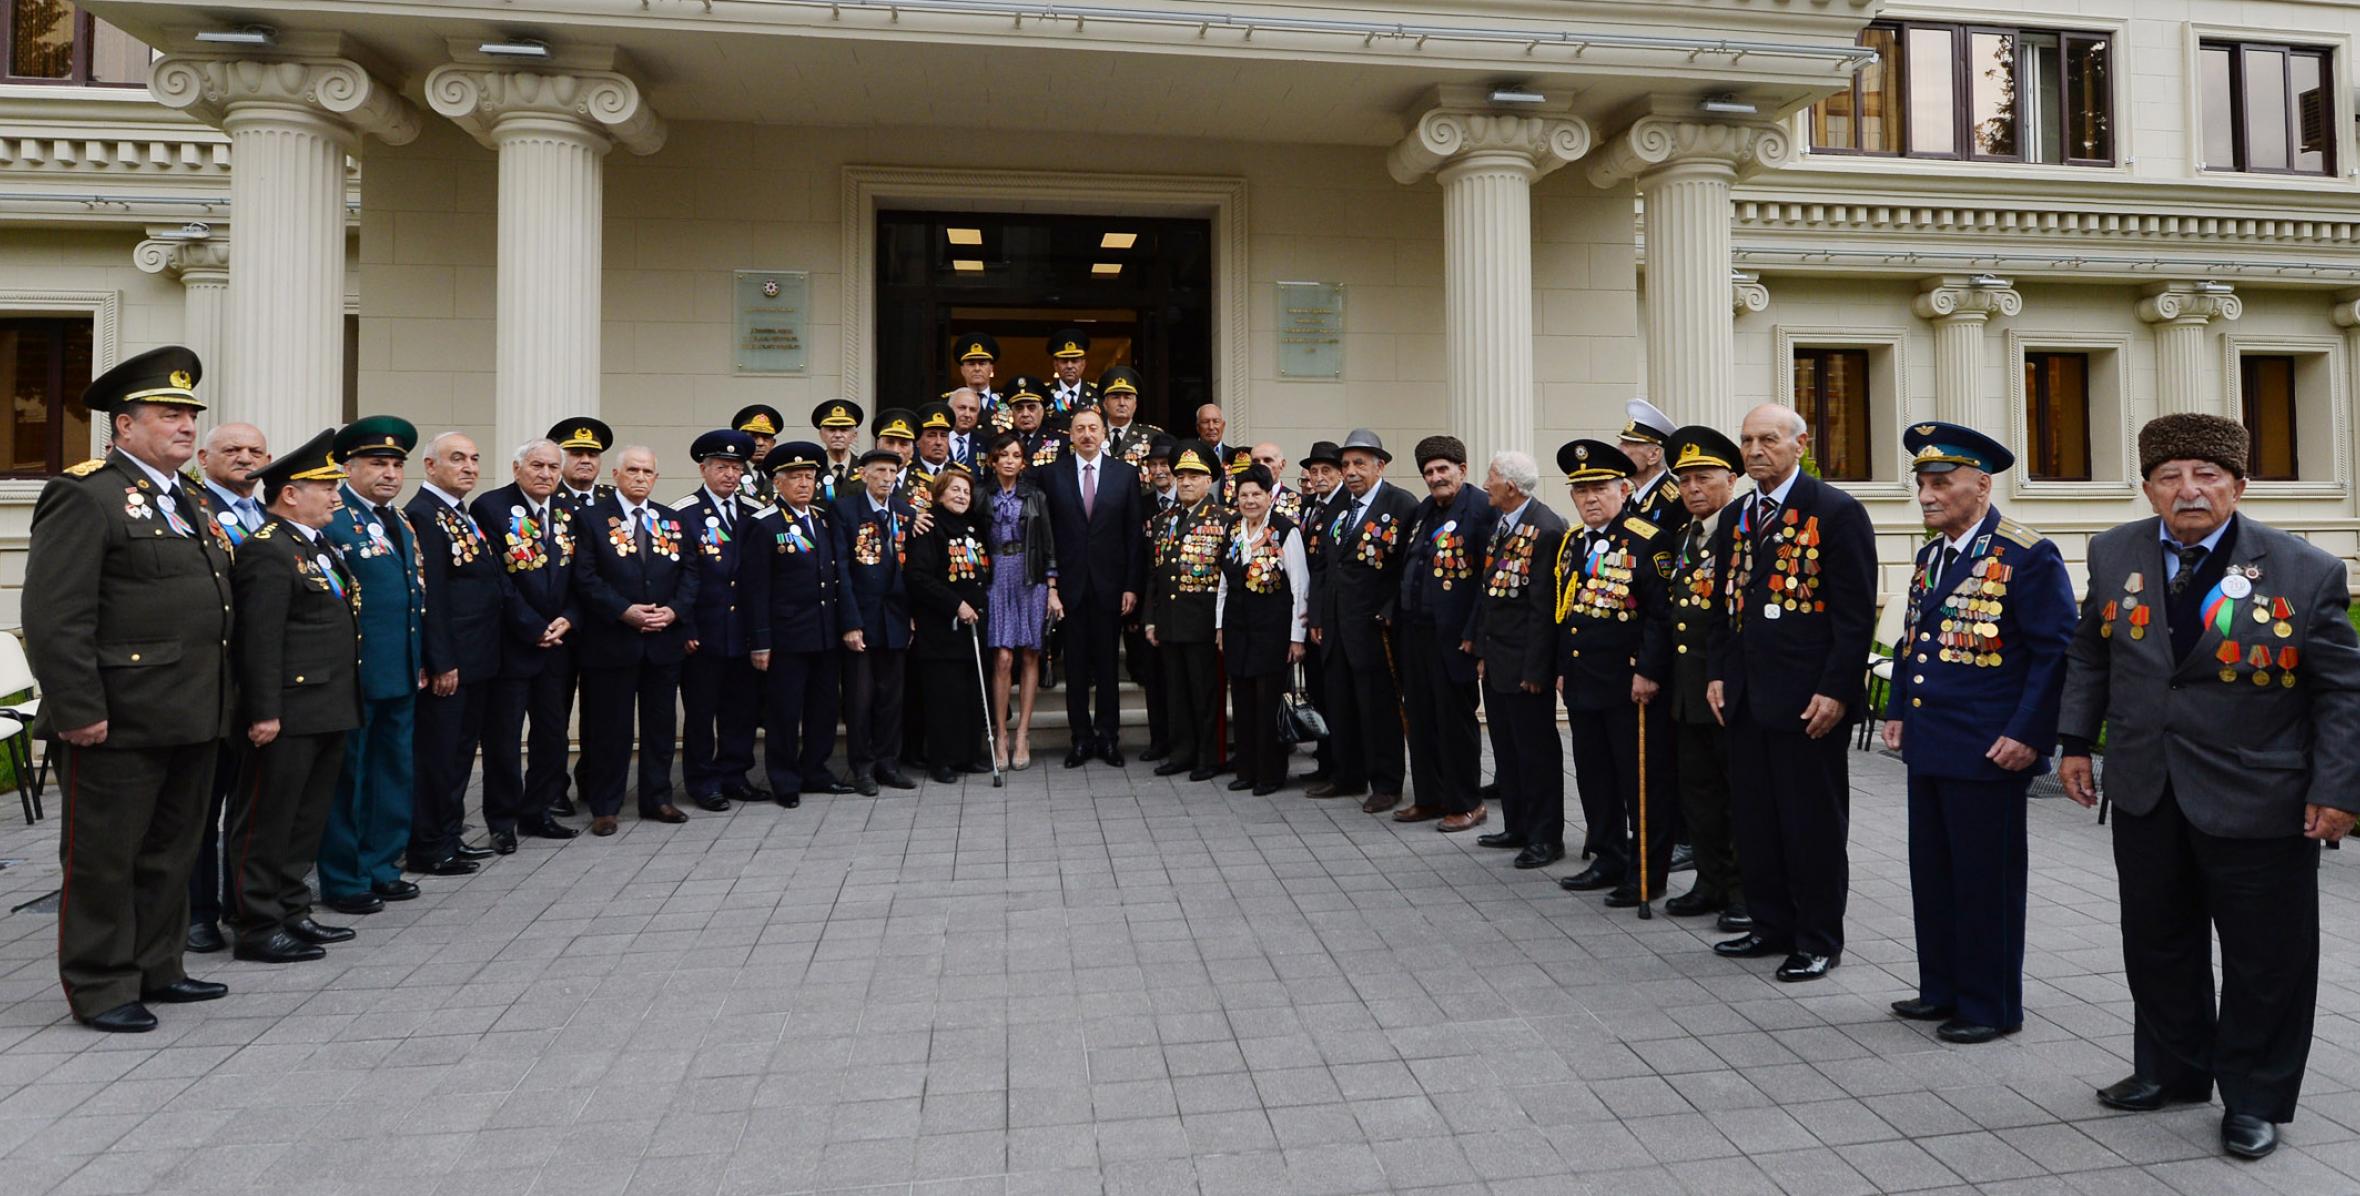 Ilham Aliyev inaugurated a new office building of the Organization of Veterans of War, Labor and Armed Forces